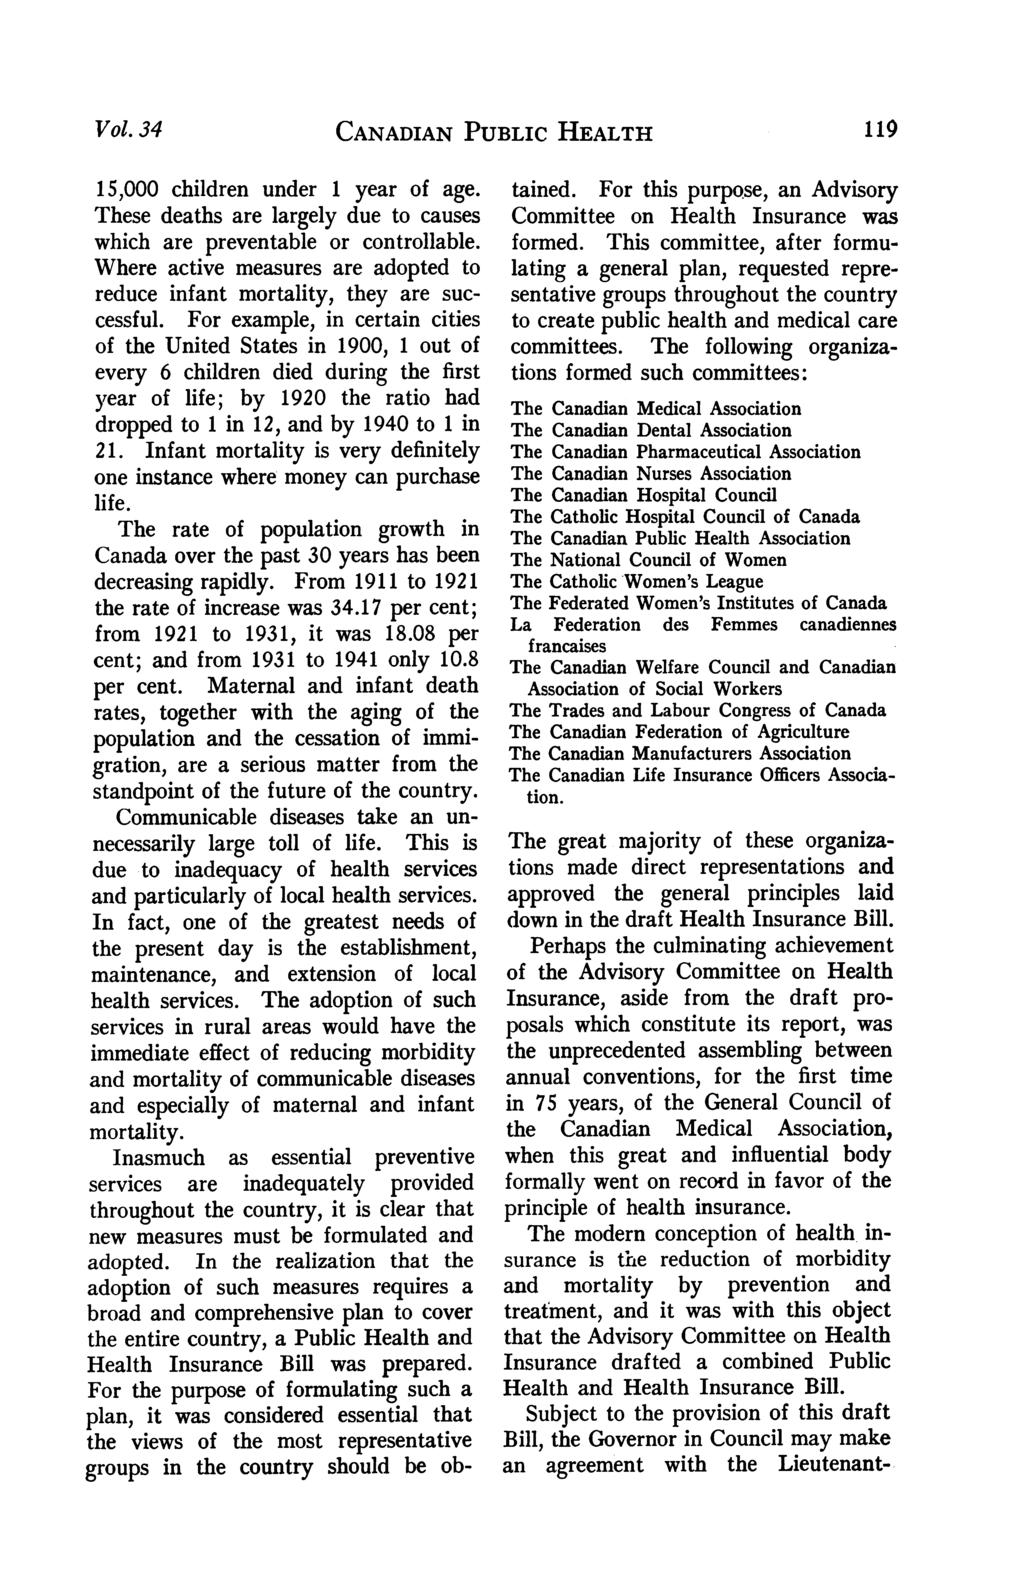 Vol. 34 CANADIAN PUBLIC HEALTH 119 15,000 children under 1 year of age. These deaths are largely due to causes which are preventable or controllable.